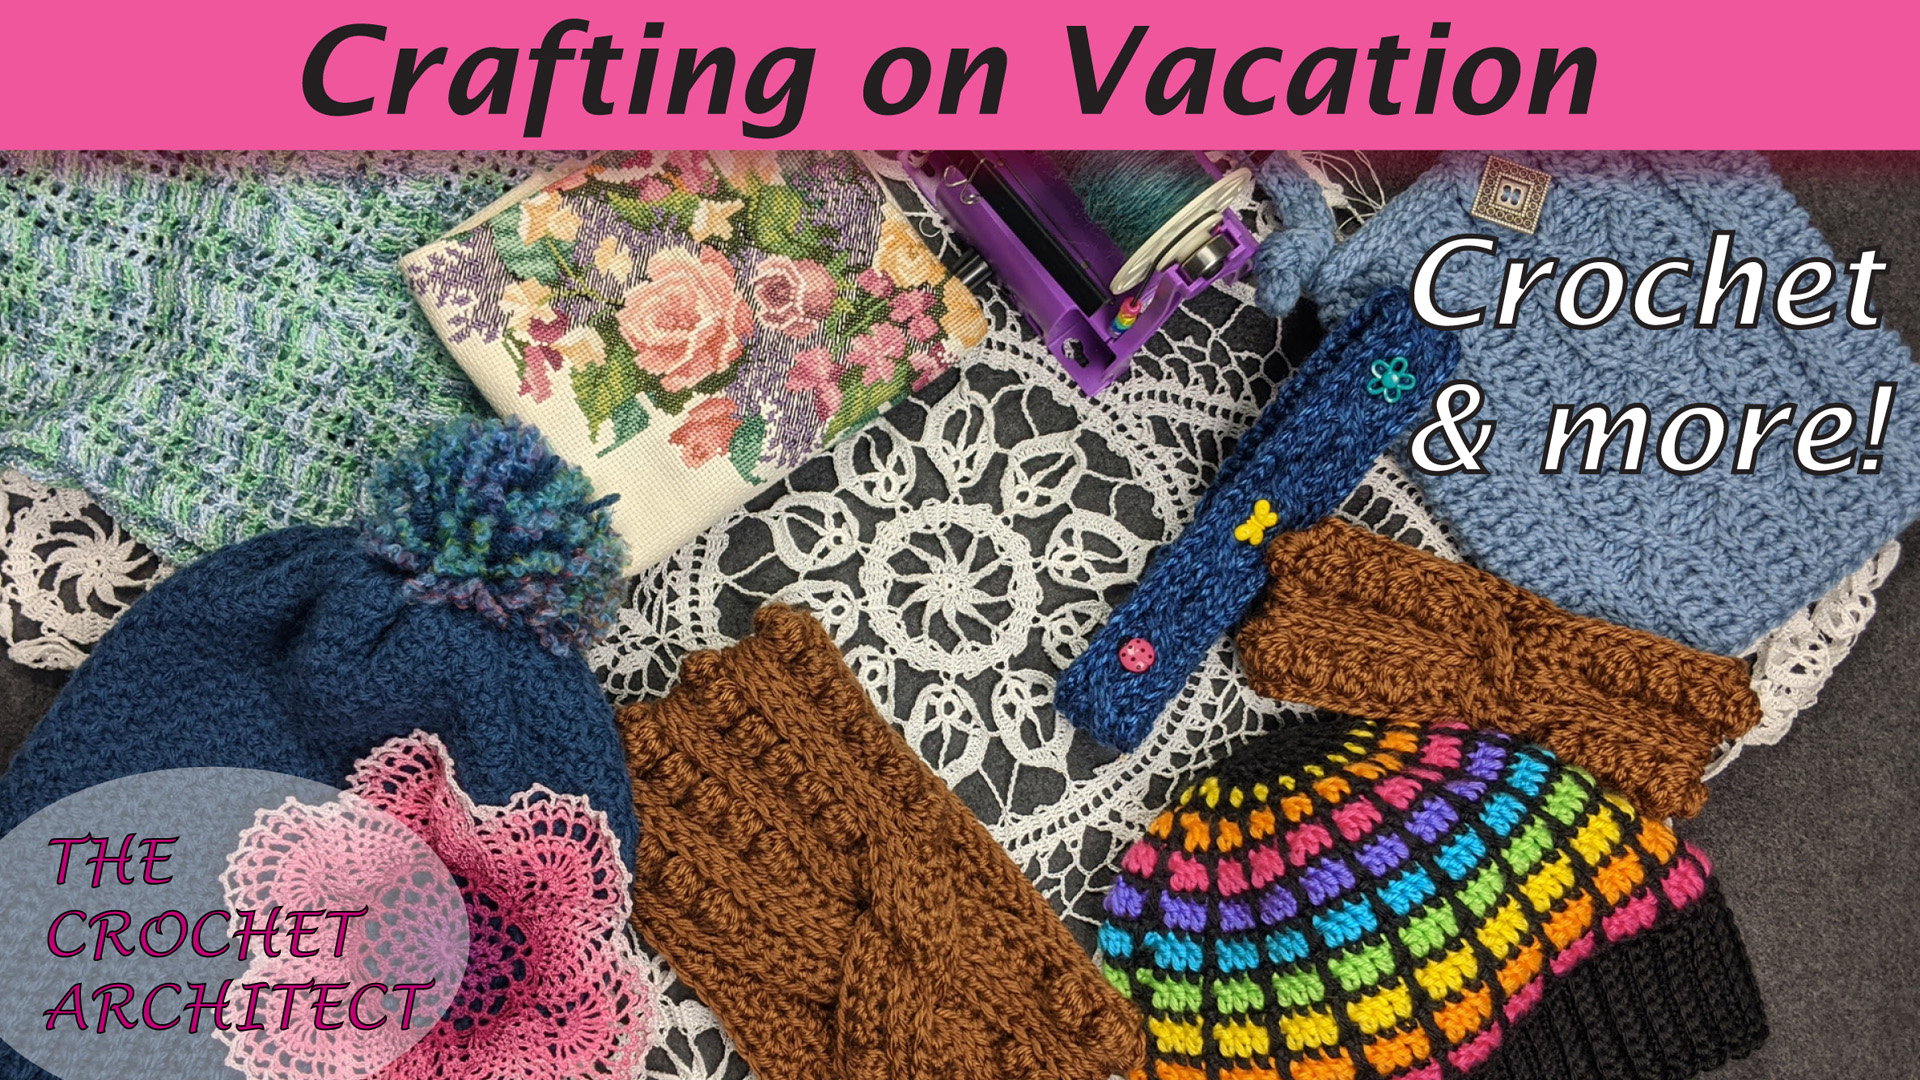 Crafting on Vacation